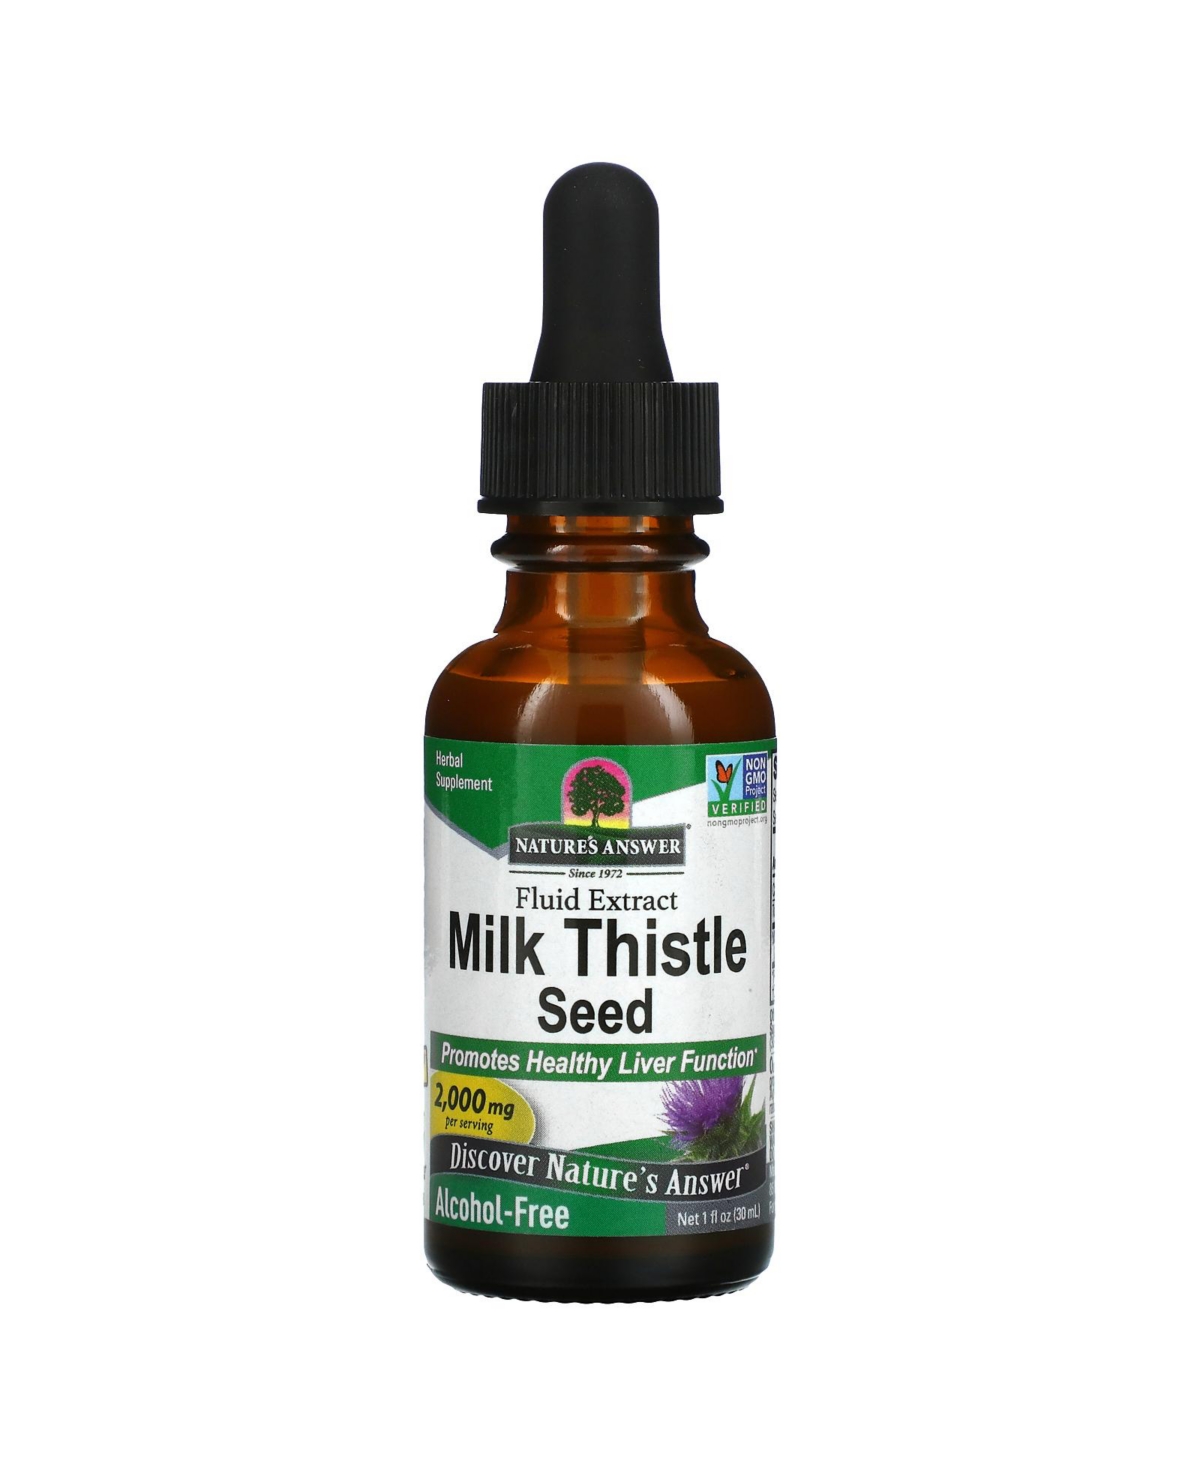 Milk Thistle Seed Fluid Extract Alcohol-Free 2 000 mg - 1 fl oz (30 ml) - Assorted Pre-pack (See Table